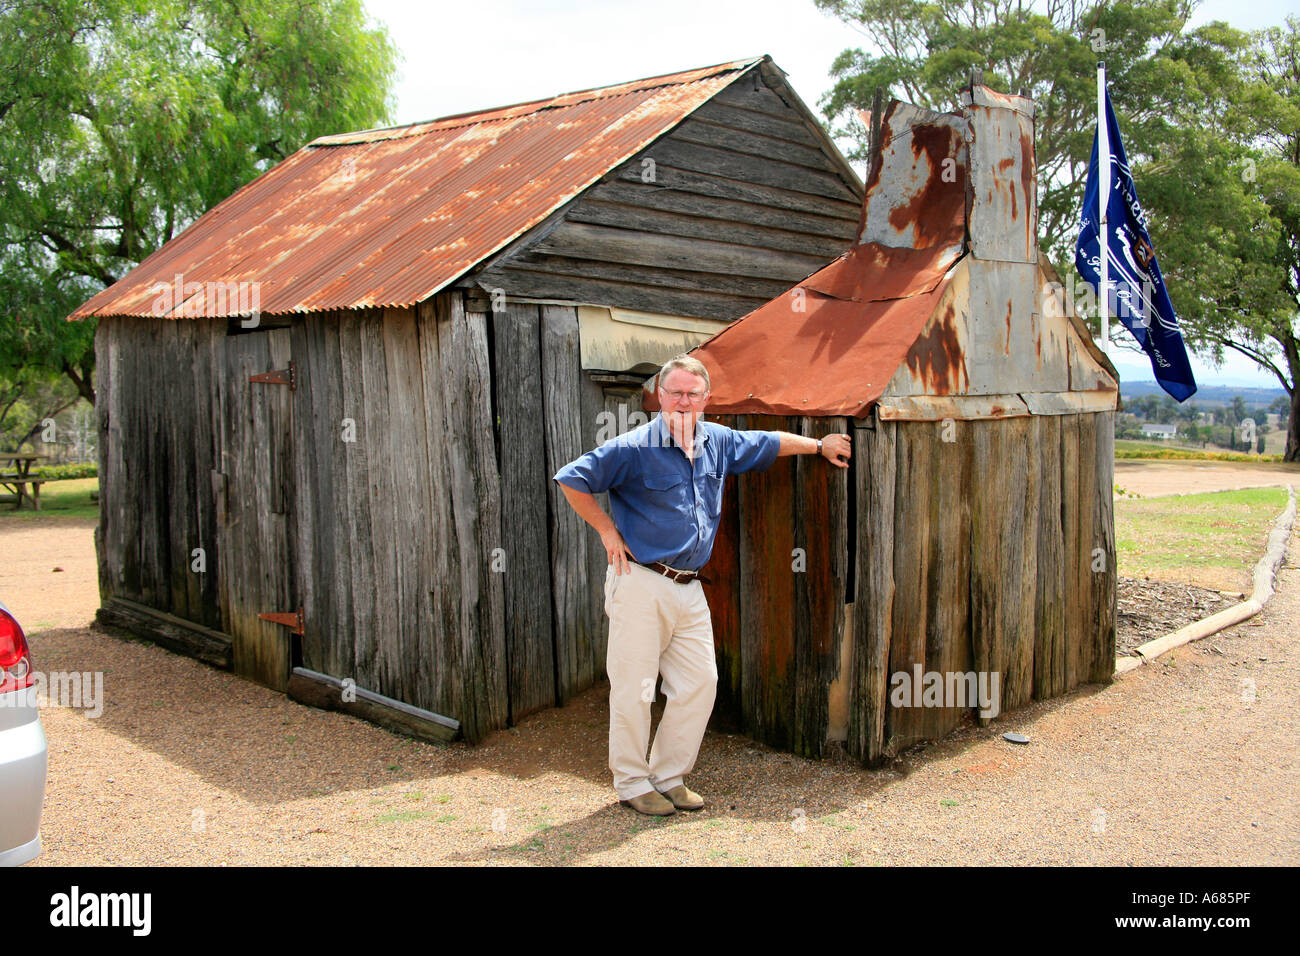 A Traditional Australian Slab hut These huts were constructed by early Australian settlers Stock Photo